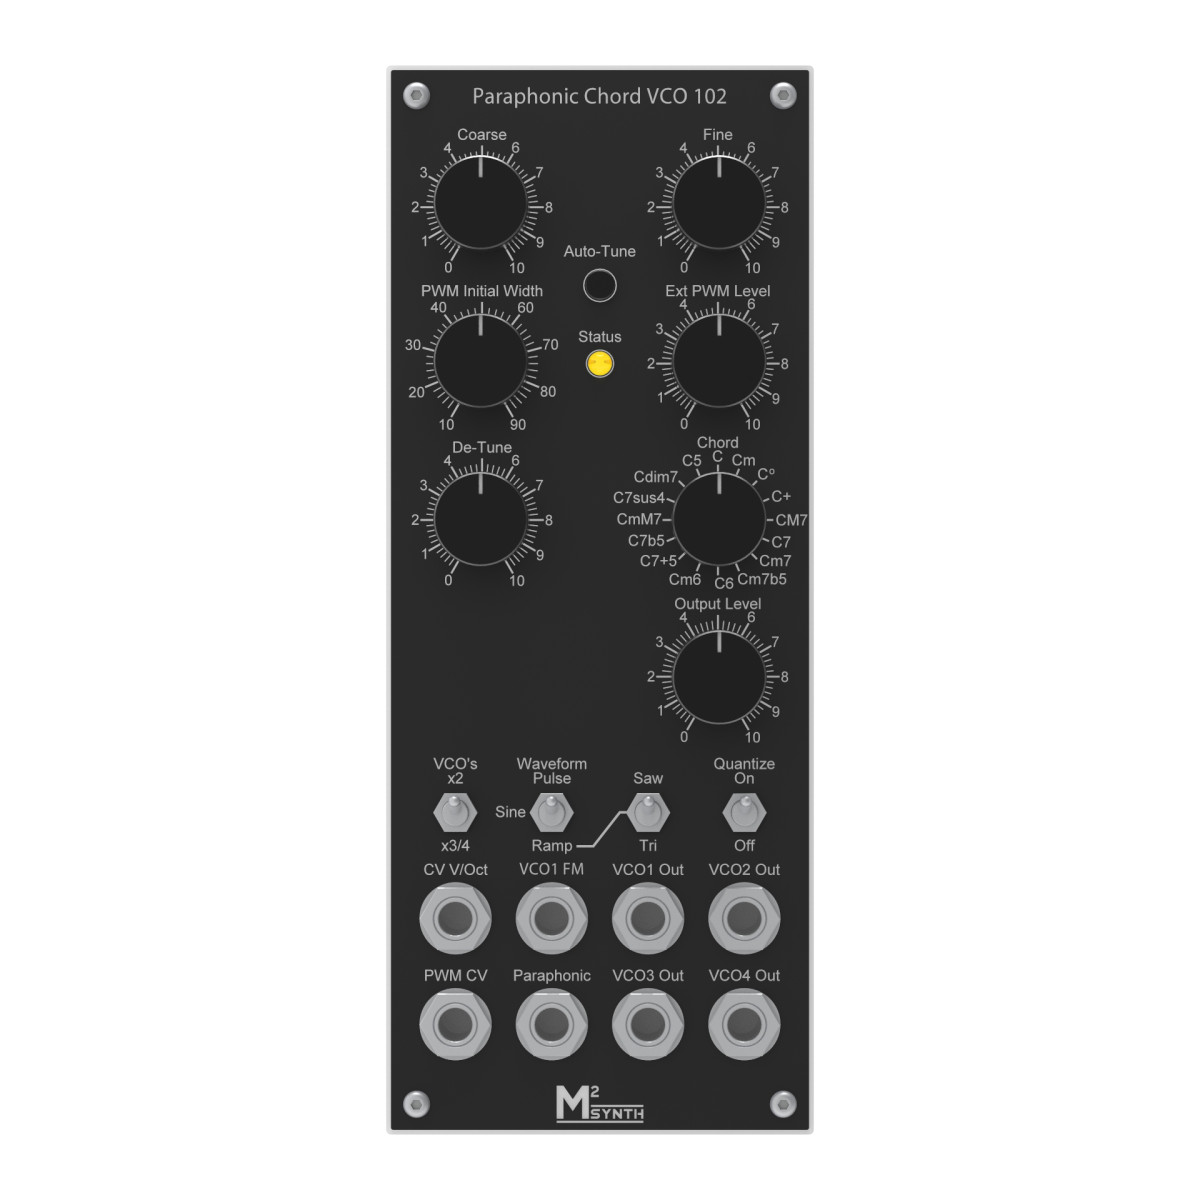 Paraphonic Chord VCO 102